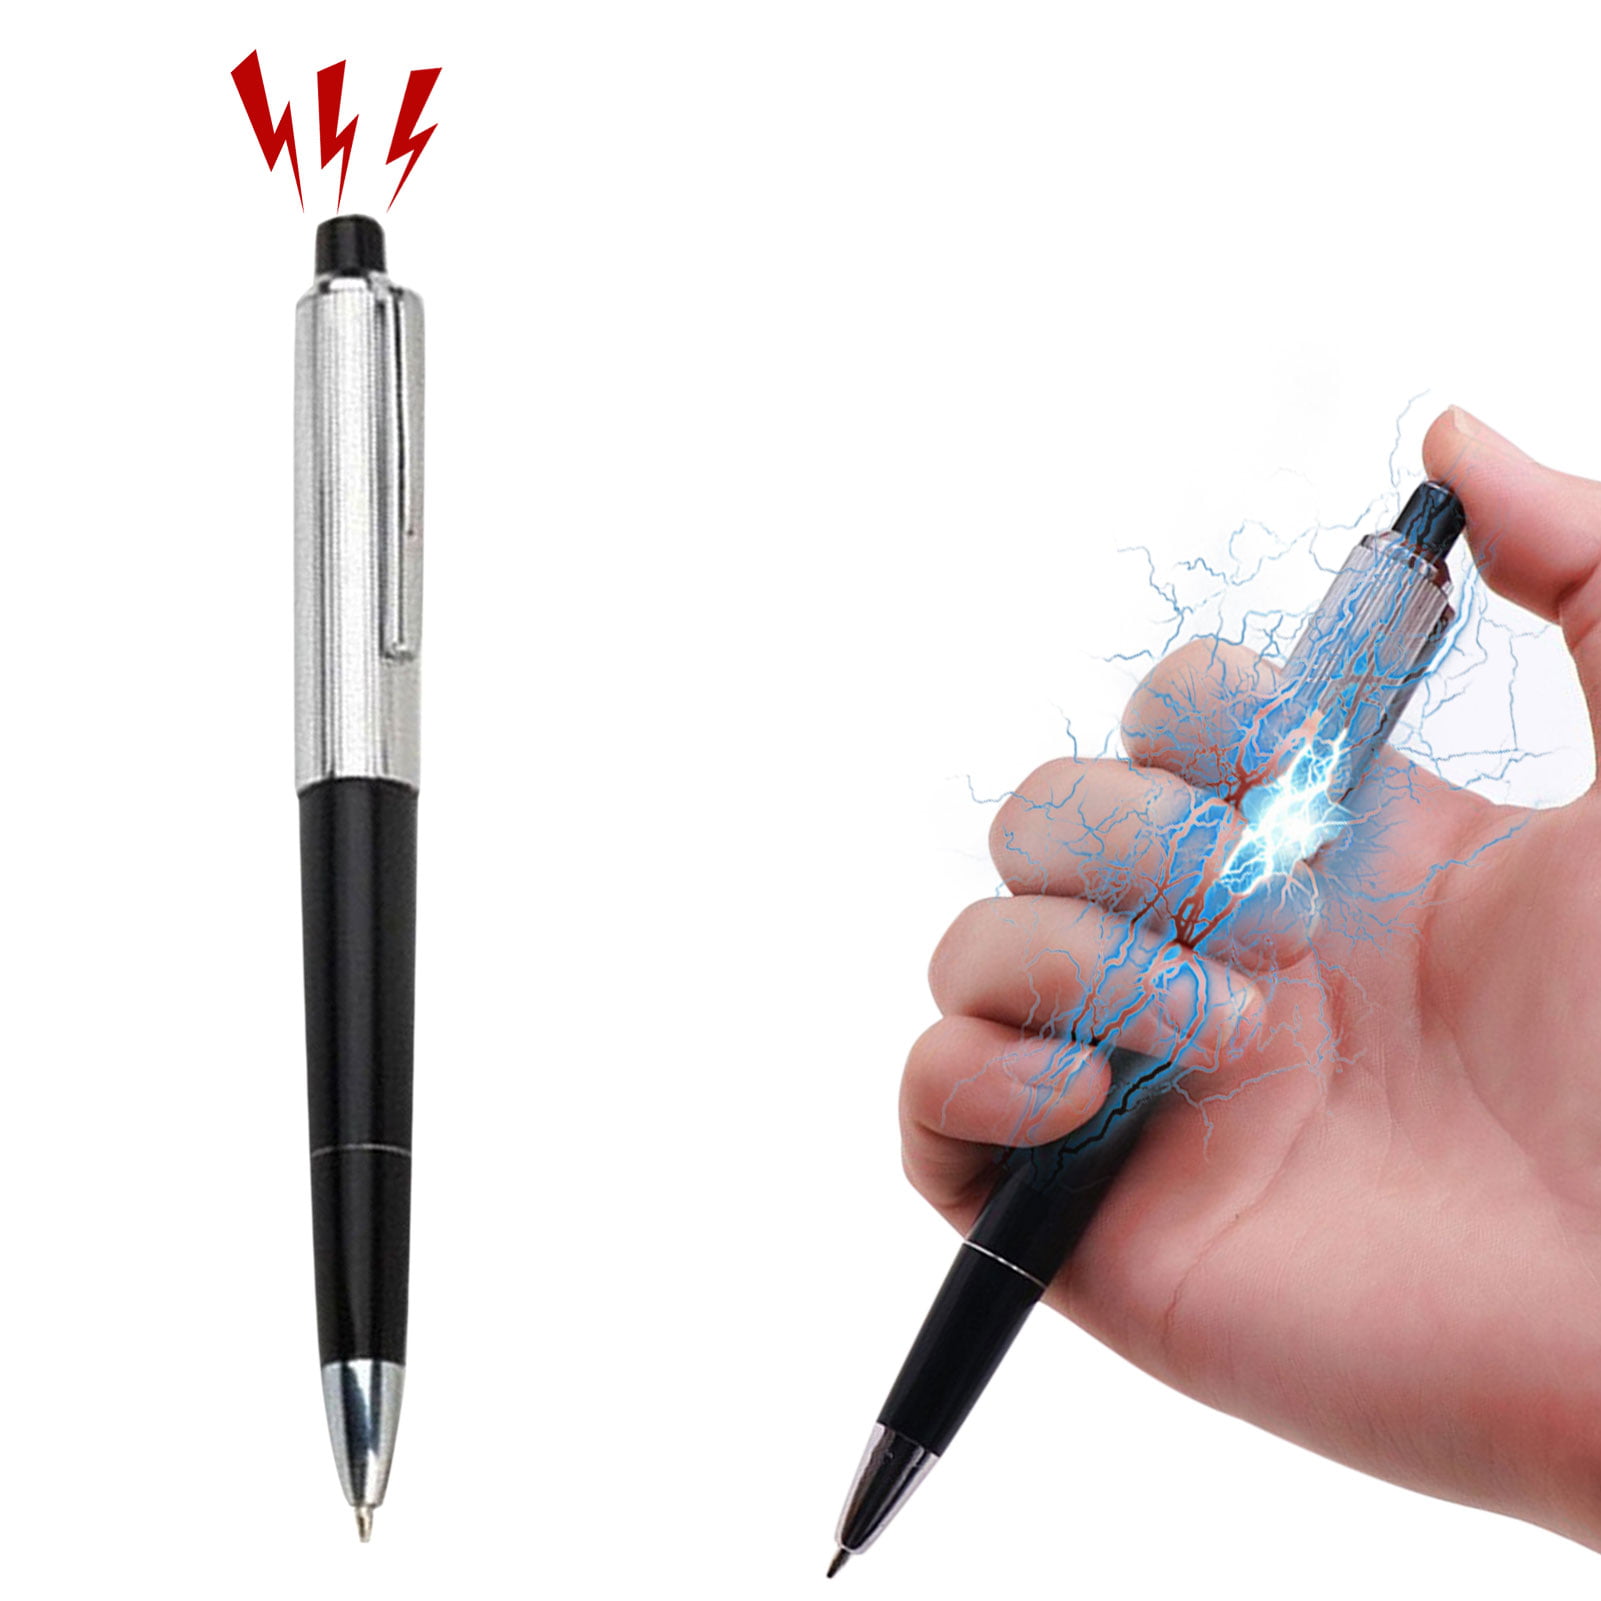 IMSHIE Electric Shock Pen | Hilarious Electric Shocking Pen Prank and Game  | Prank Your Friends and Family, Novelty Electric Shocking Pens for Office